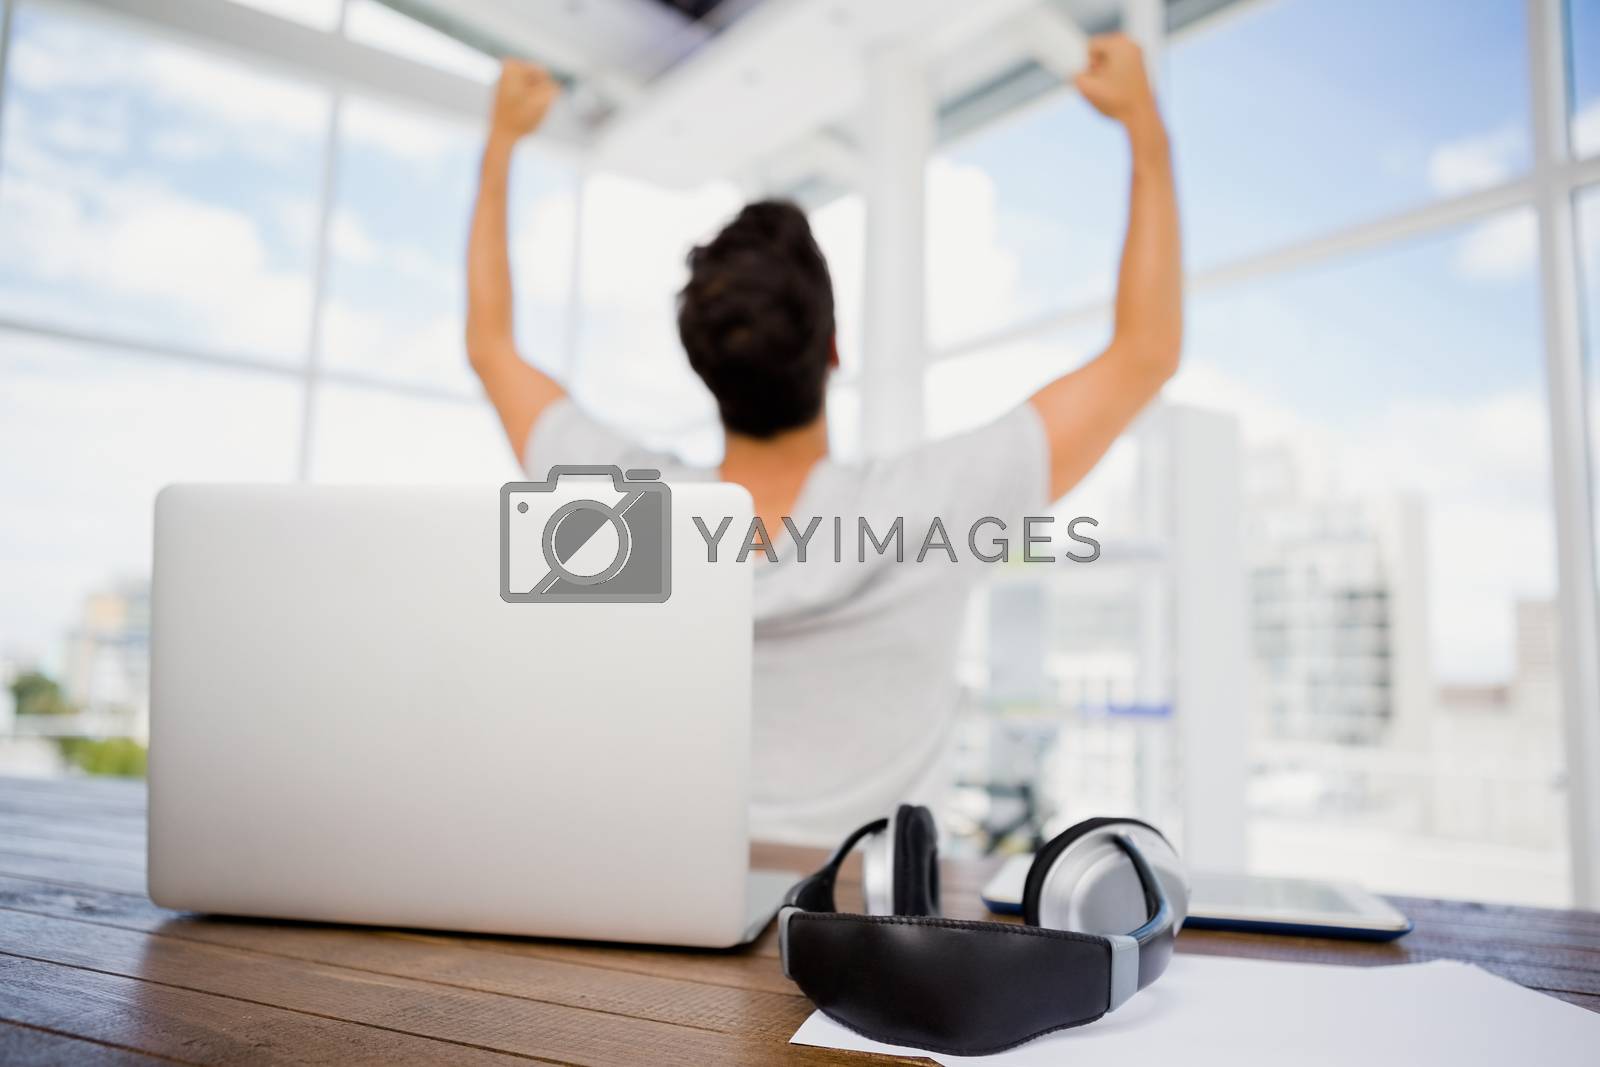 Royalty free image of Man cheering at his desk by Wavebreakmedia